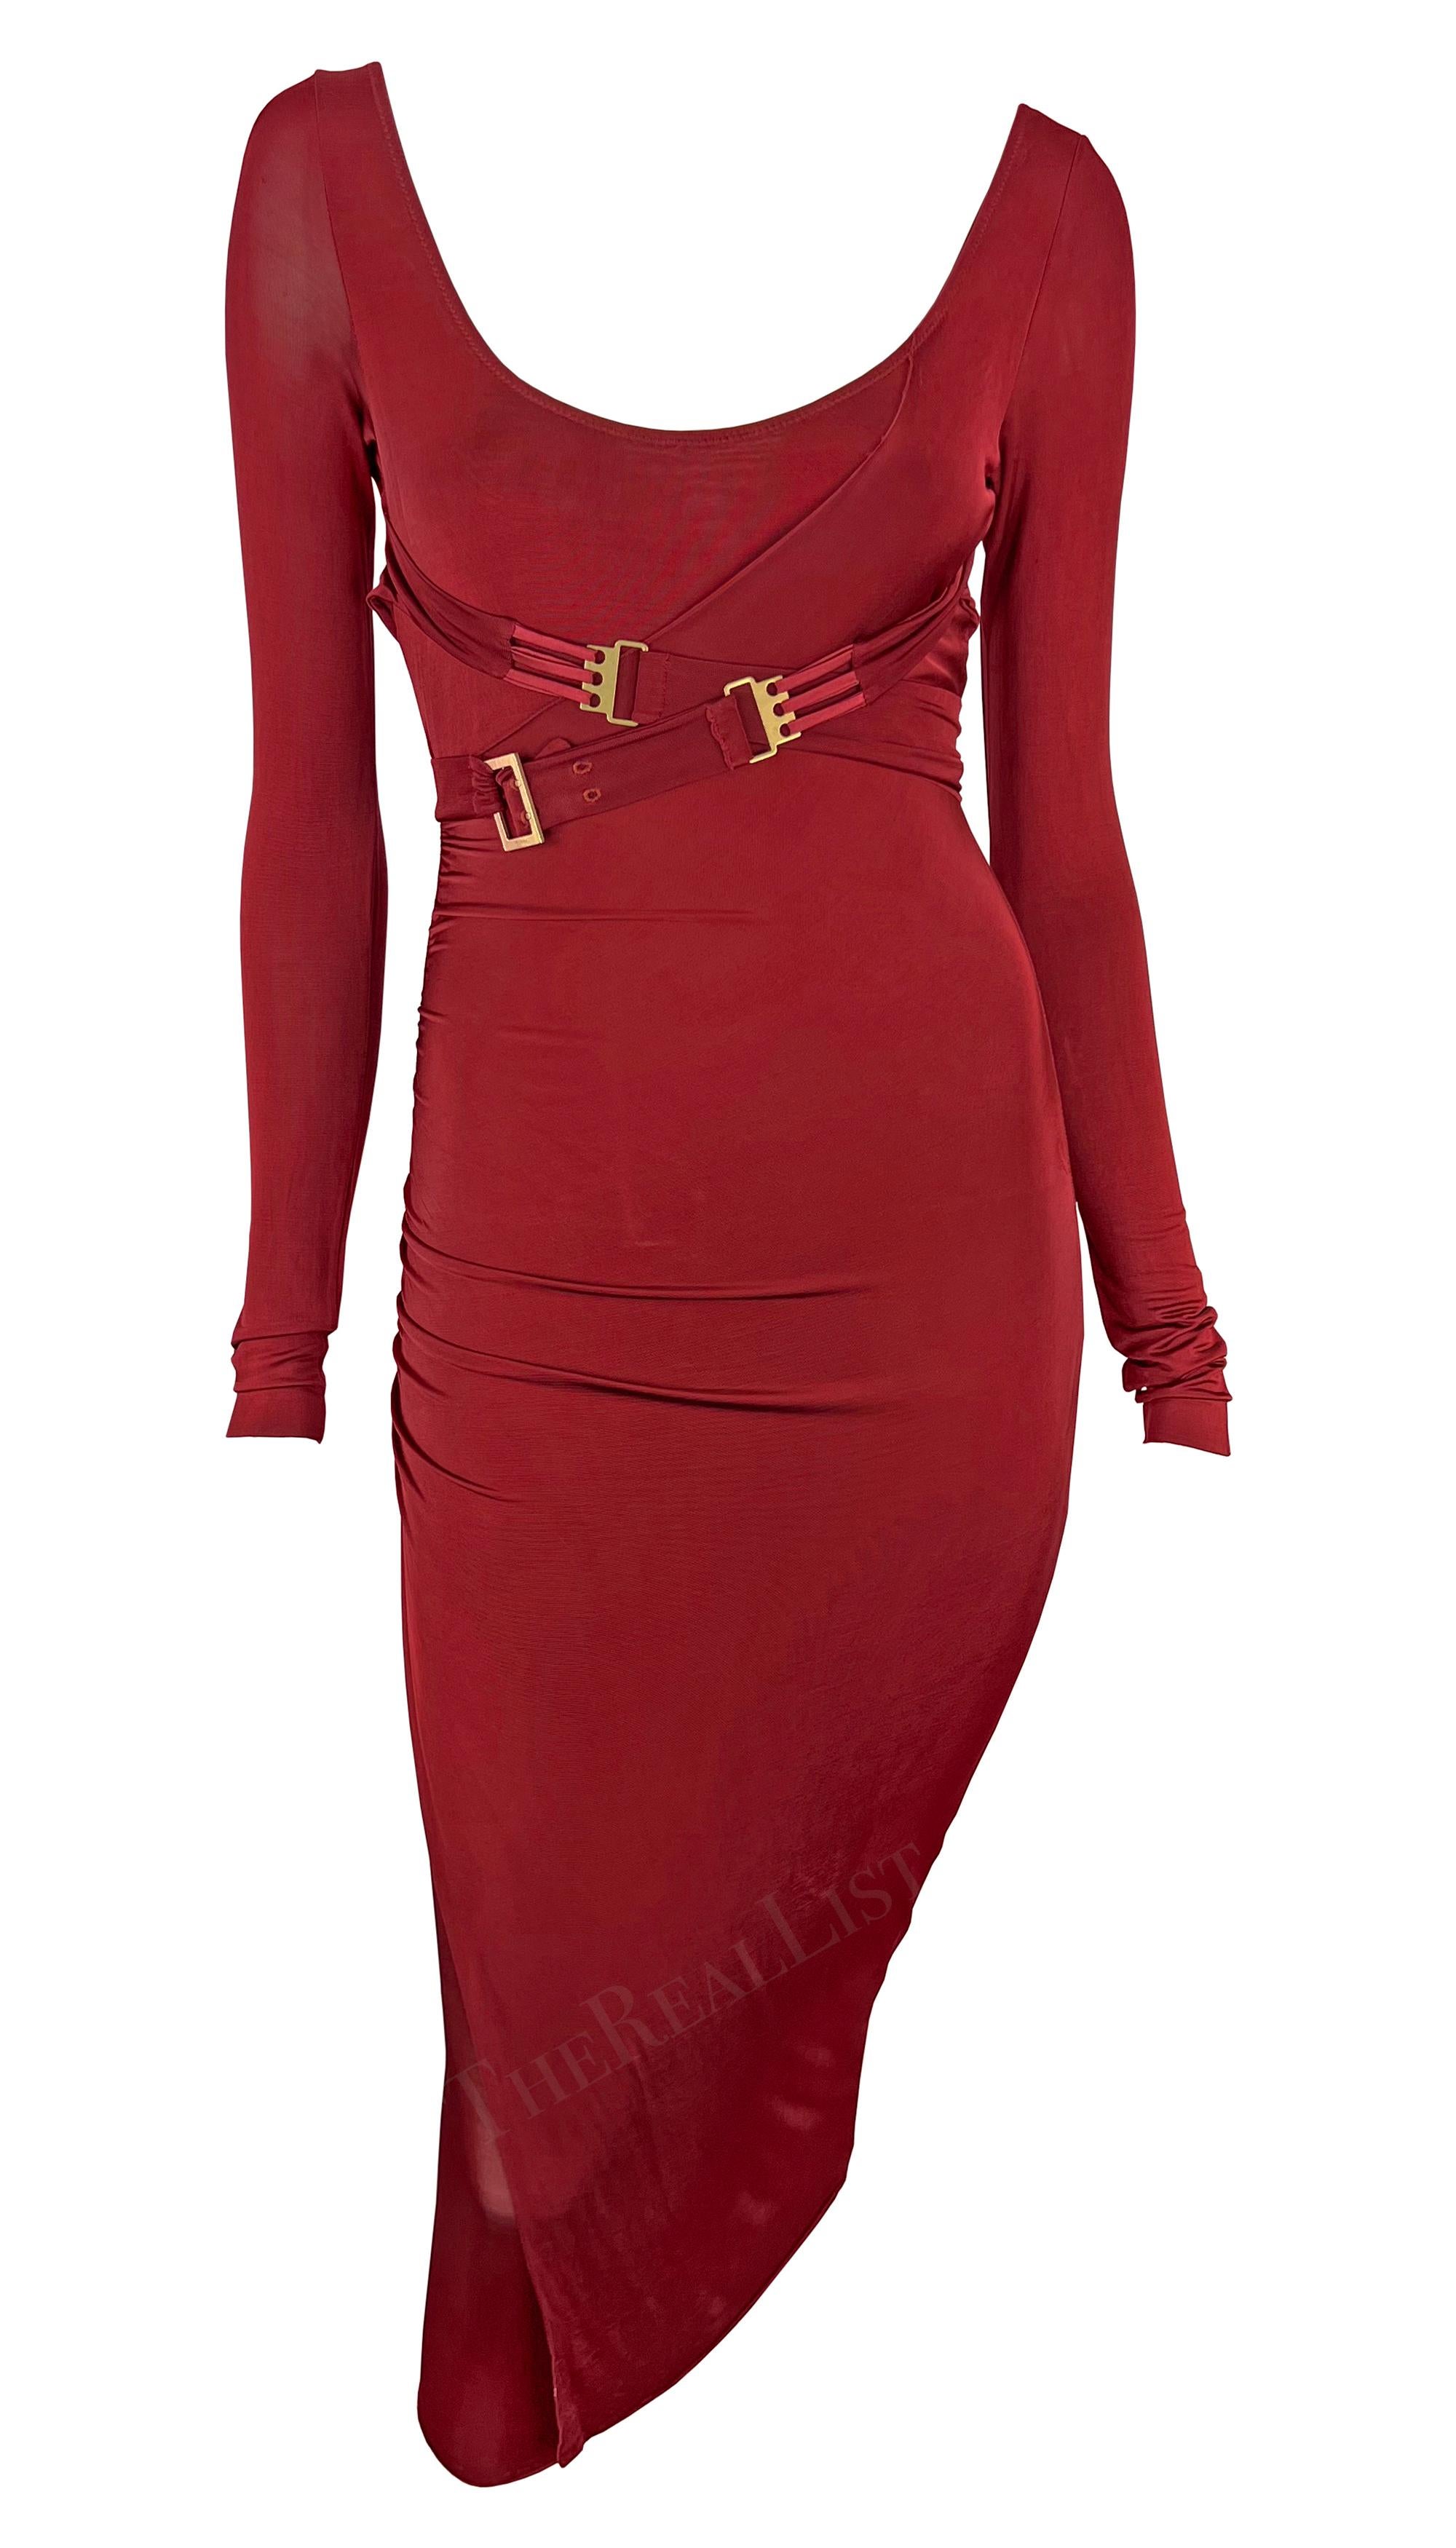 Presenting a fabulous red Gucci body con dress, designed by Tom Ford. From the Fall/Winter 2003 collection, this dress features long sleeves, a knee-length hem, and a low scoop neckline. Made complete with belt buckles that can be wrapped around the